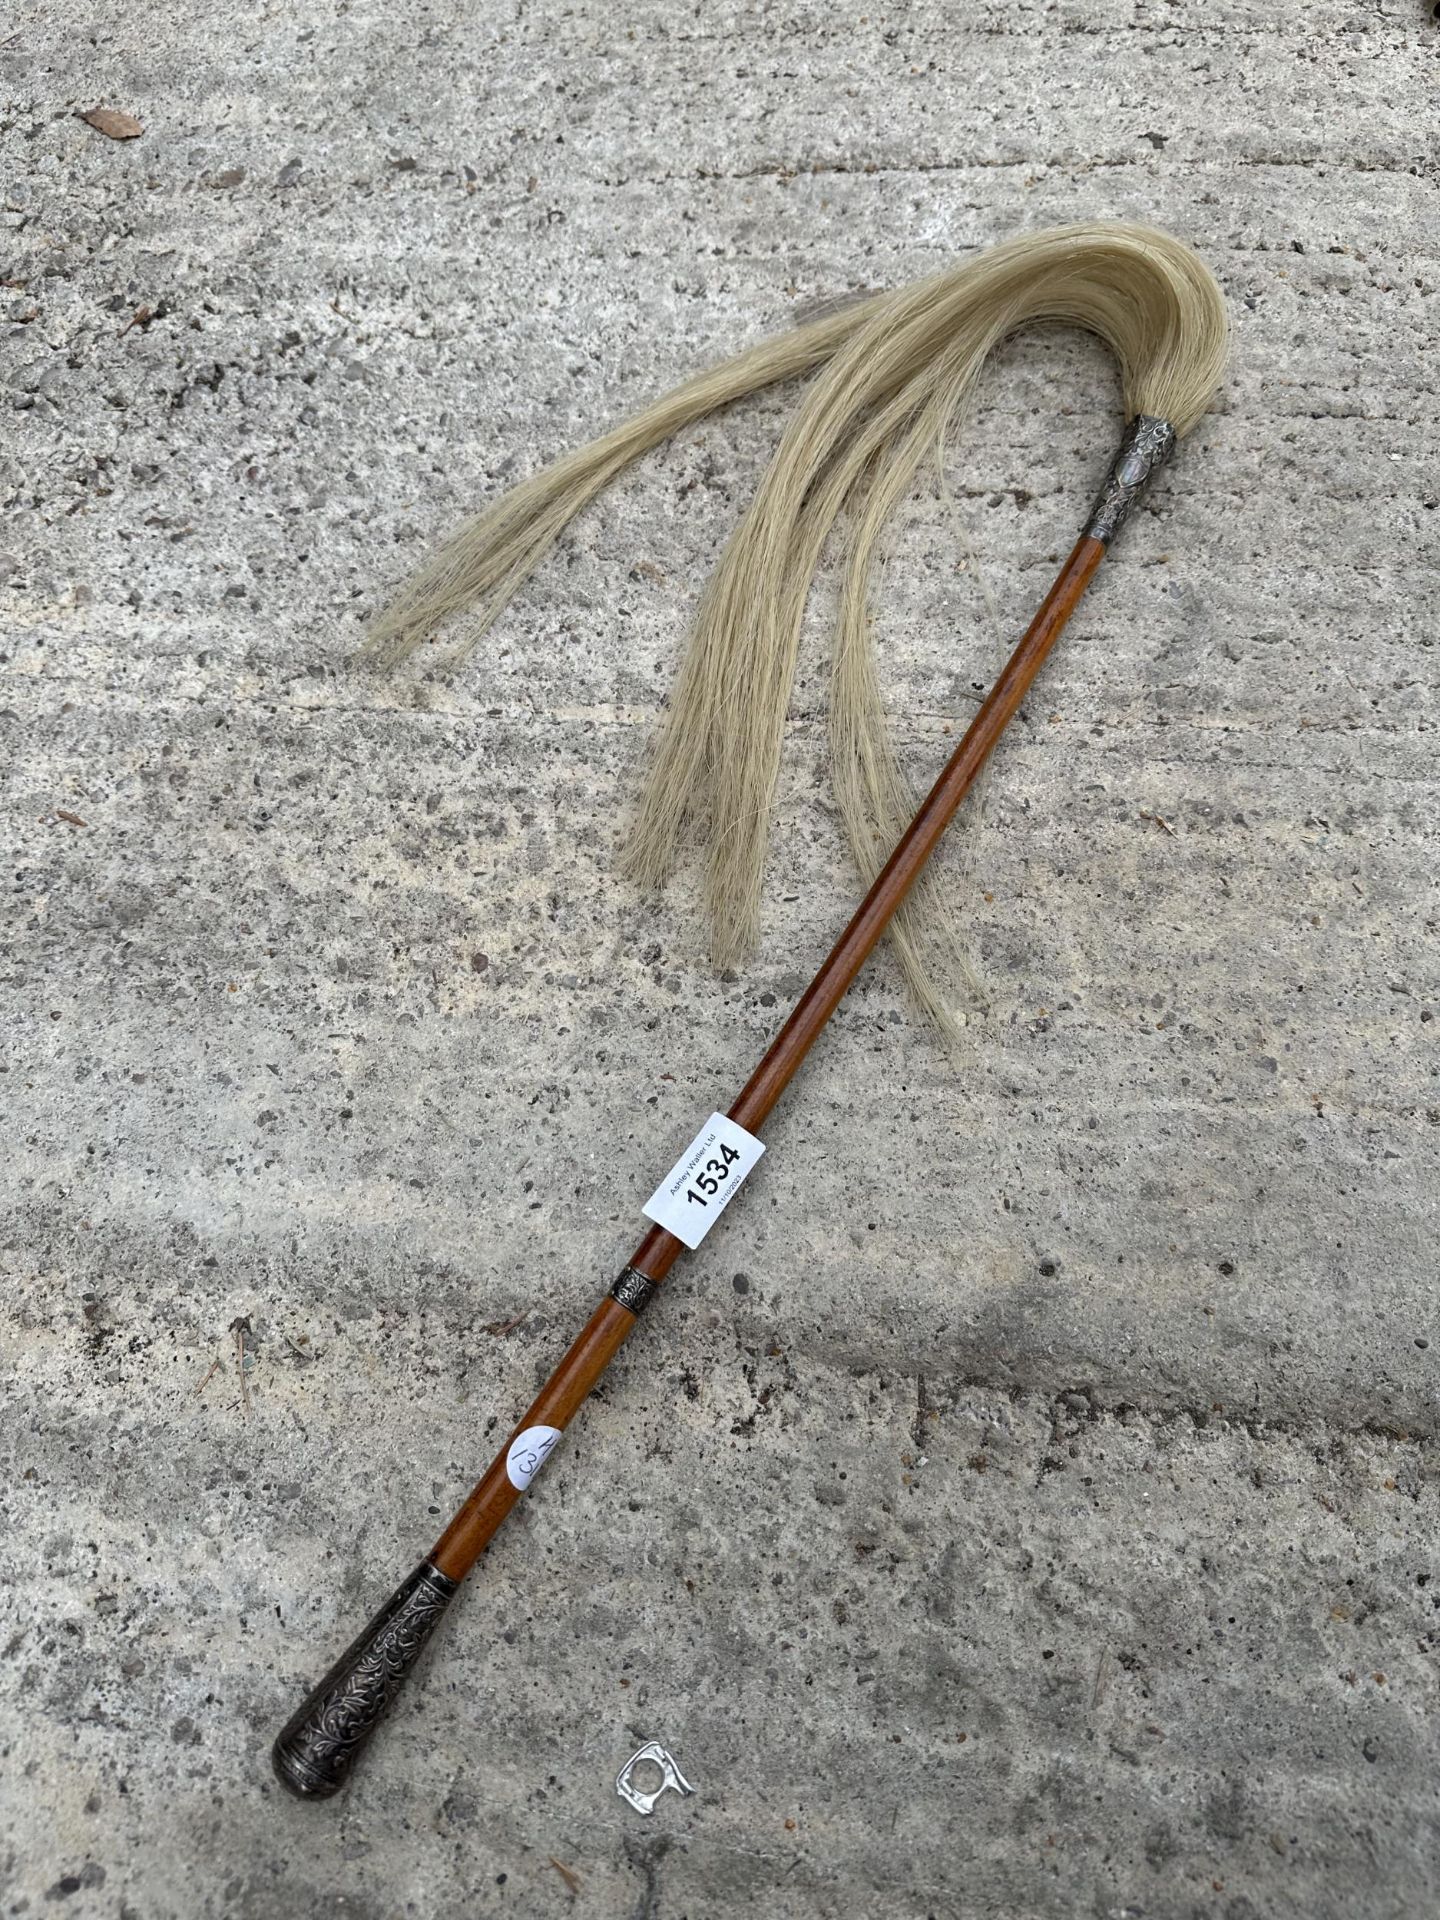 A VINTAGE INDIAN HORSE HAIR FLY WHISK SWAT WITH BELIEVED INDIAN SILVER COLLARS AND FERIAL